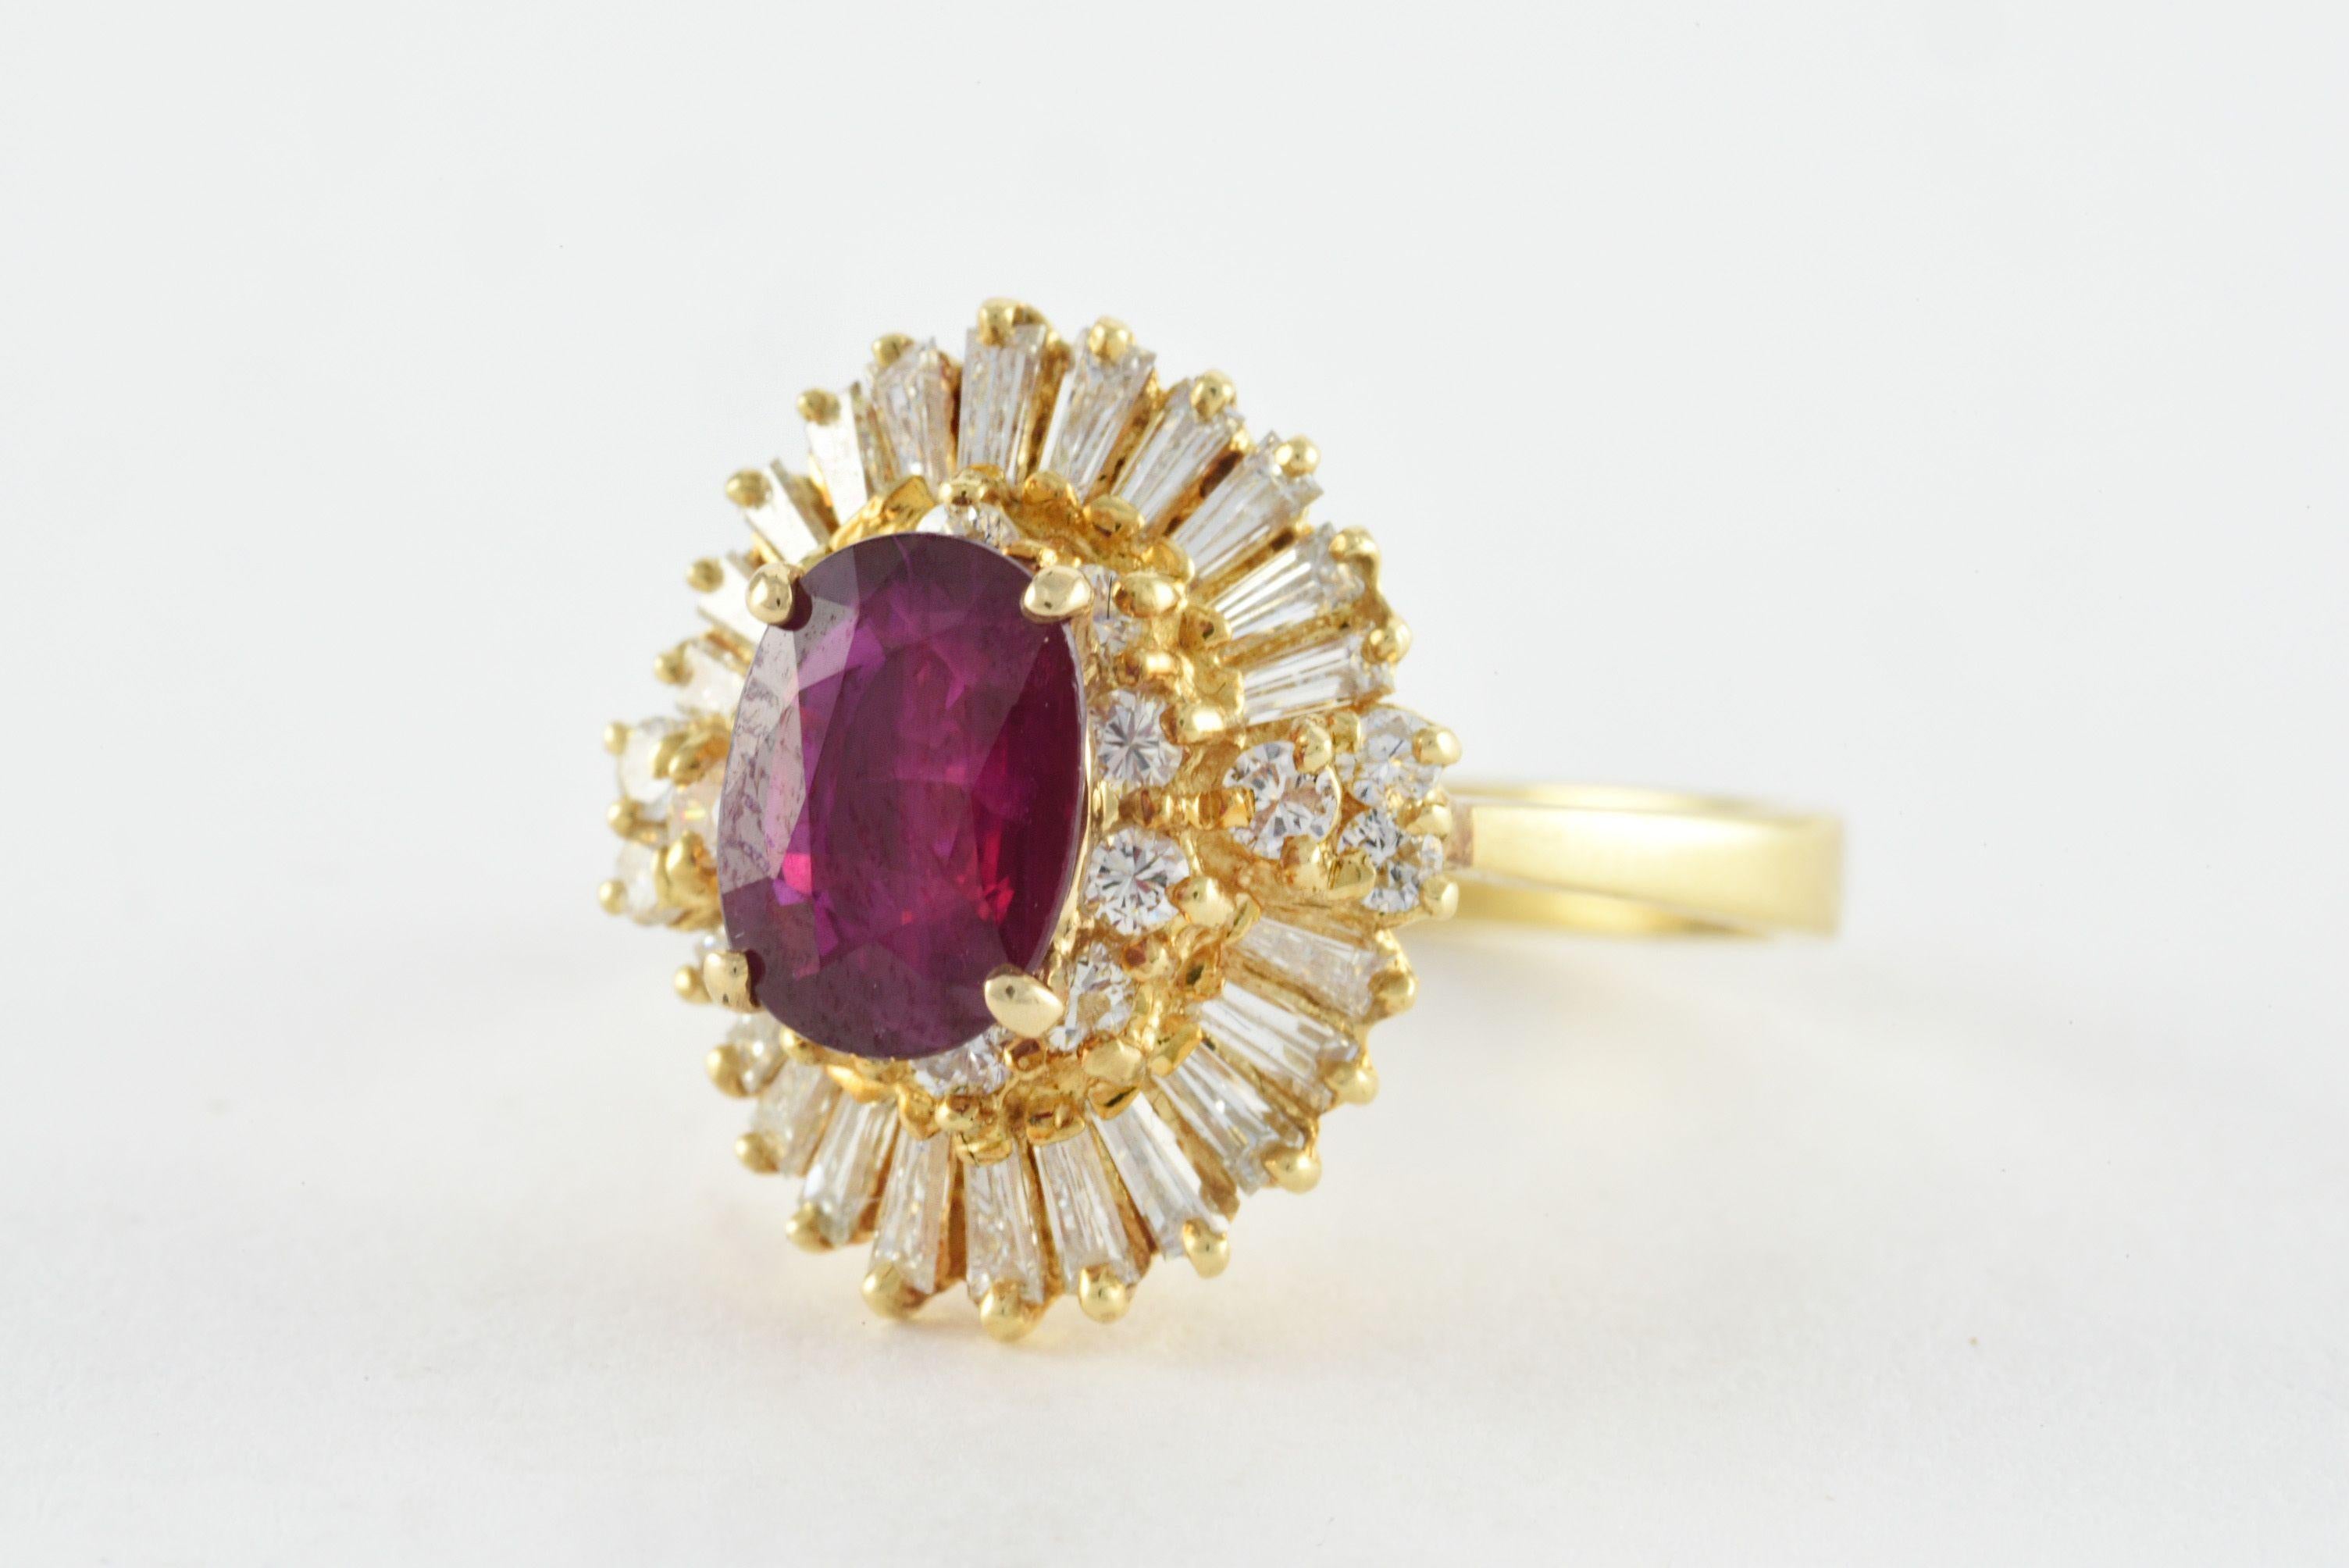 A natural oval-shaped red ruby measuring approximately 1.30 carats sits at the center of this striking ballerina ring surrounded by a mix of baguette and round shaped diamonds totaling approximately 1.09 carats atop a decorative openwork under